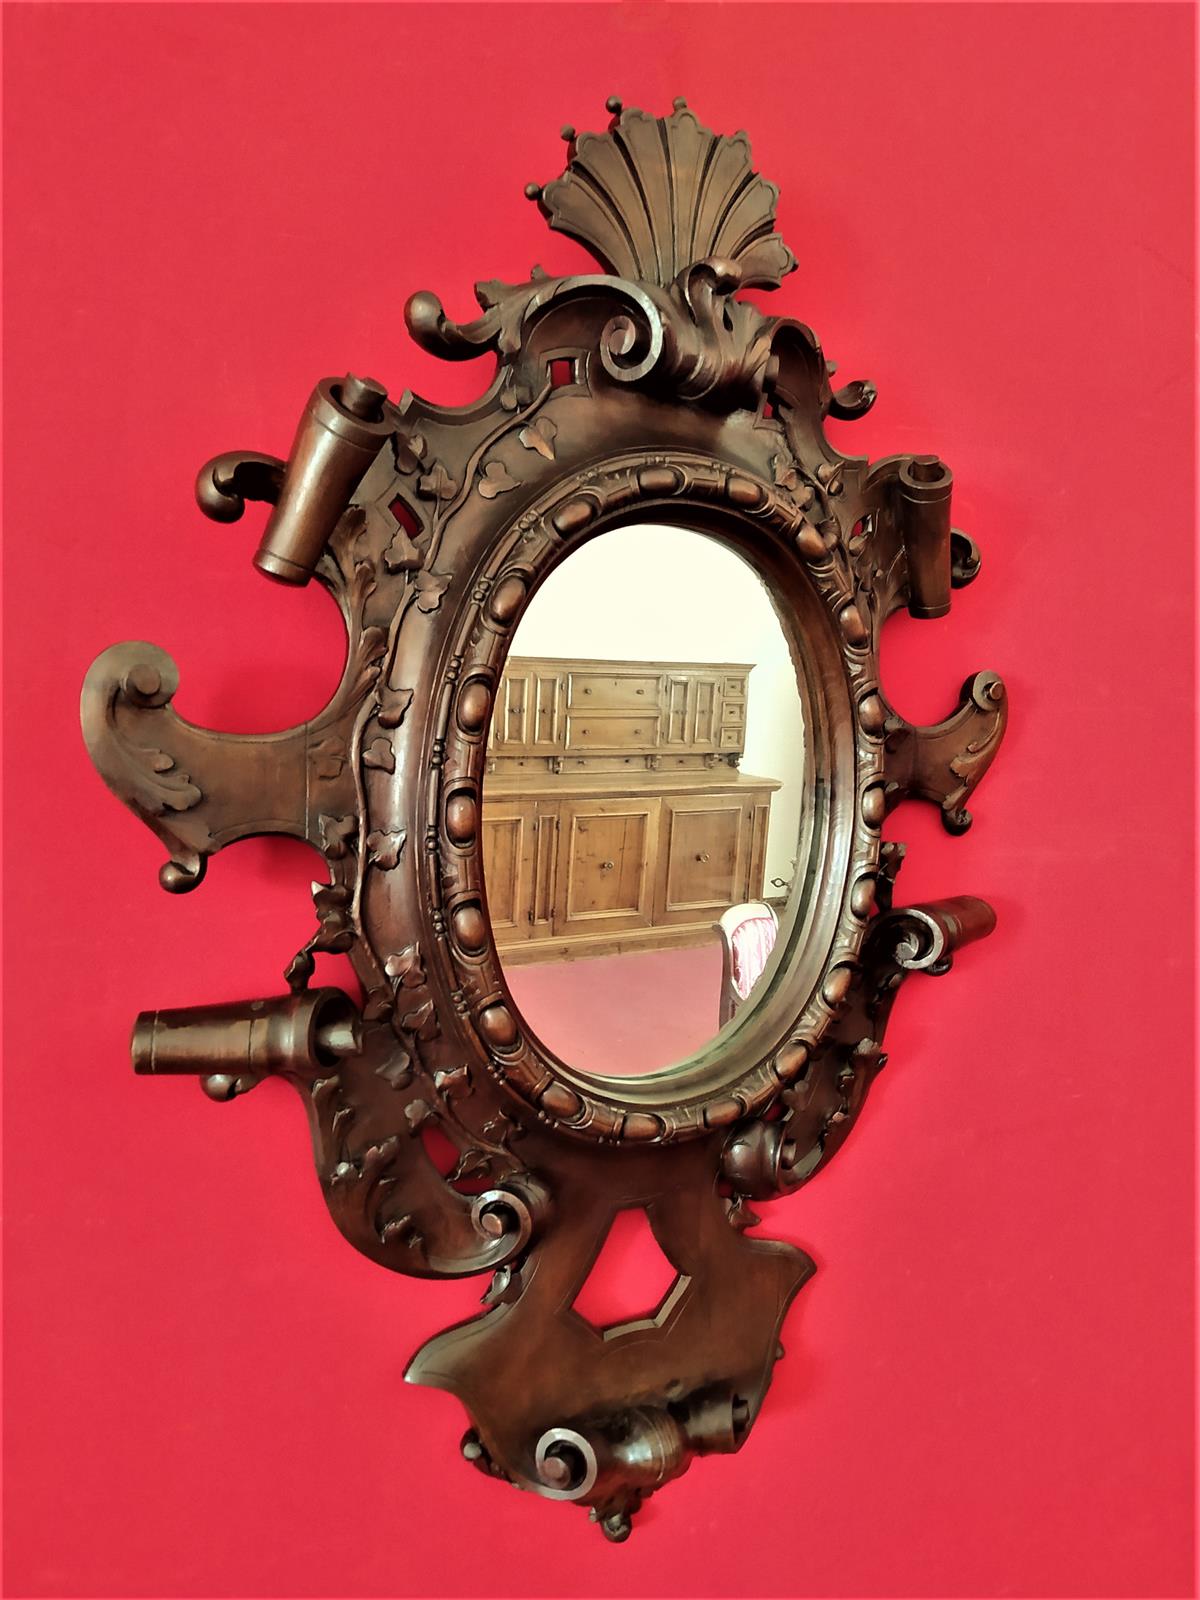 Mirror in carved wood